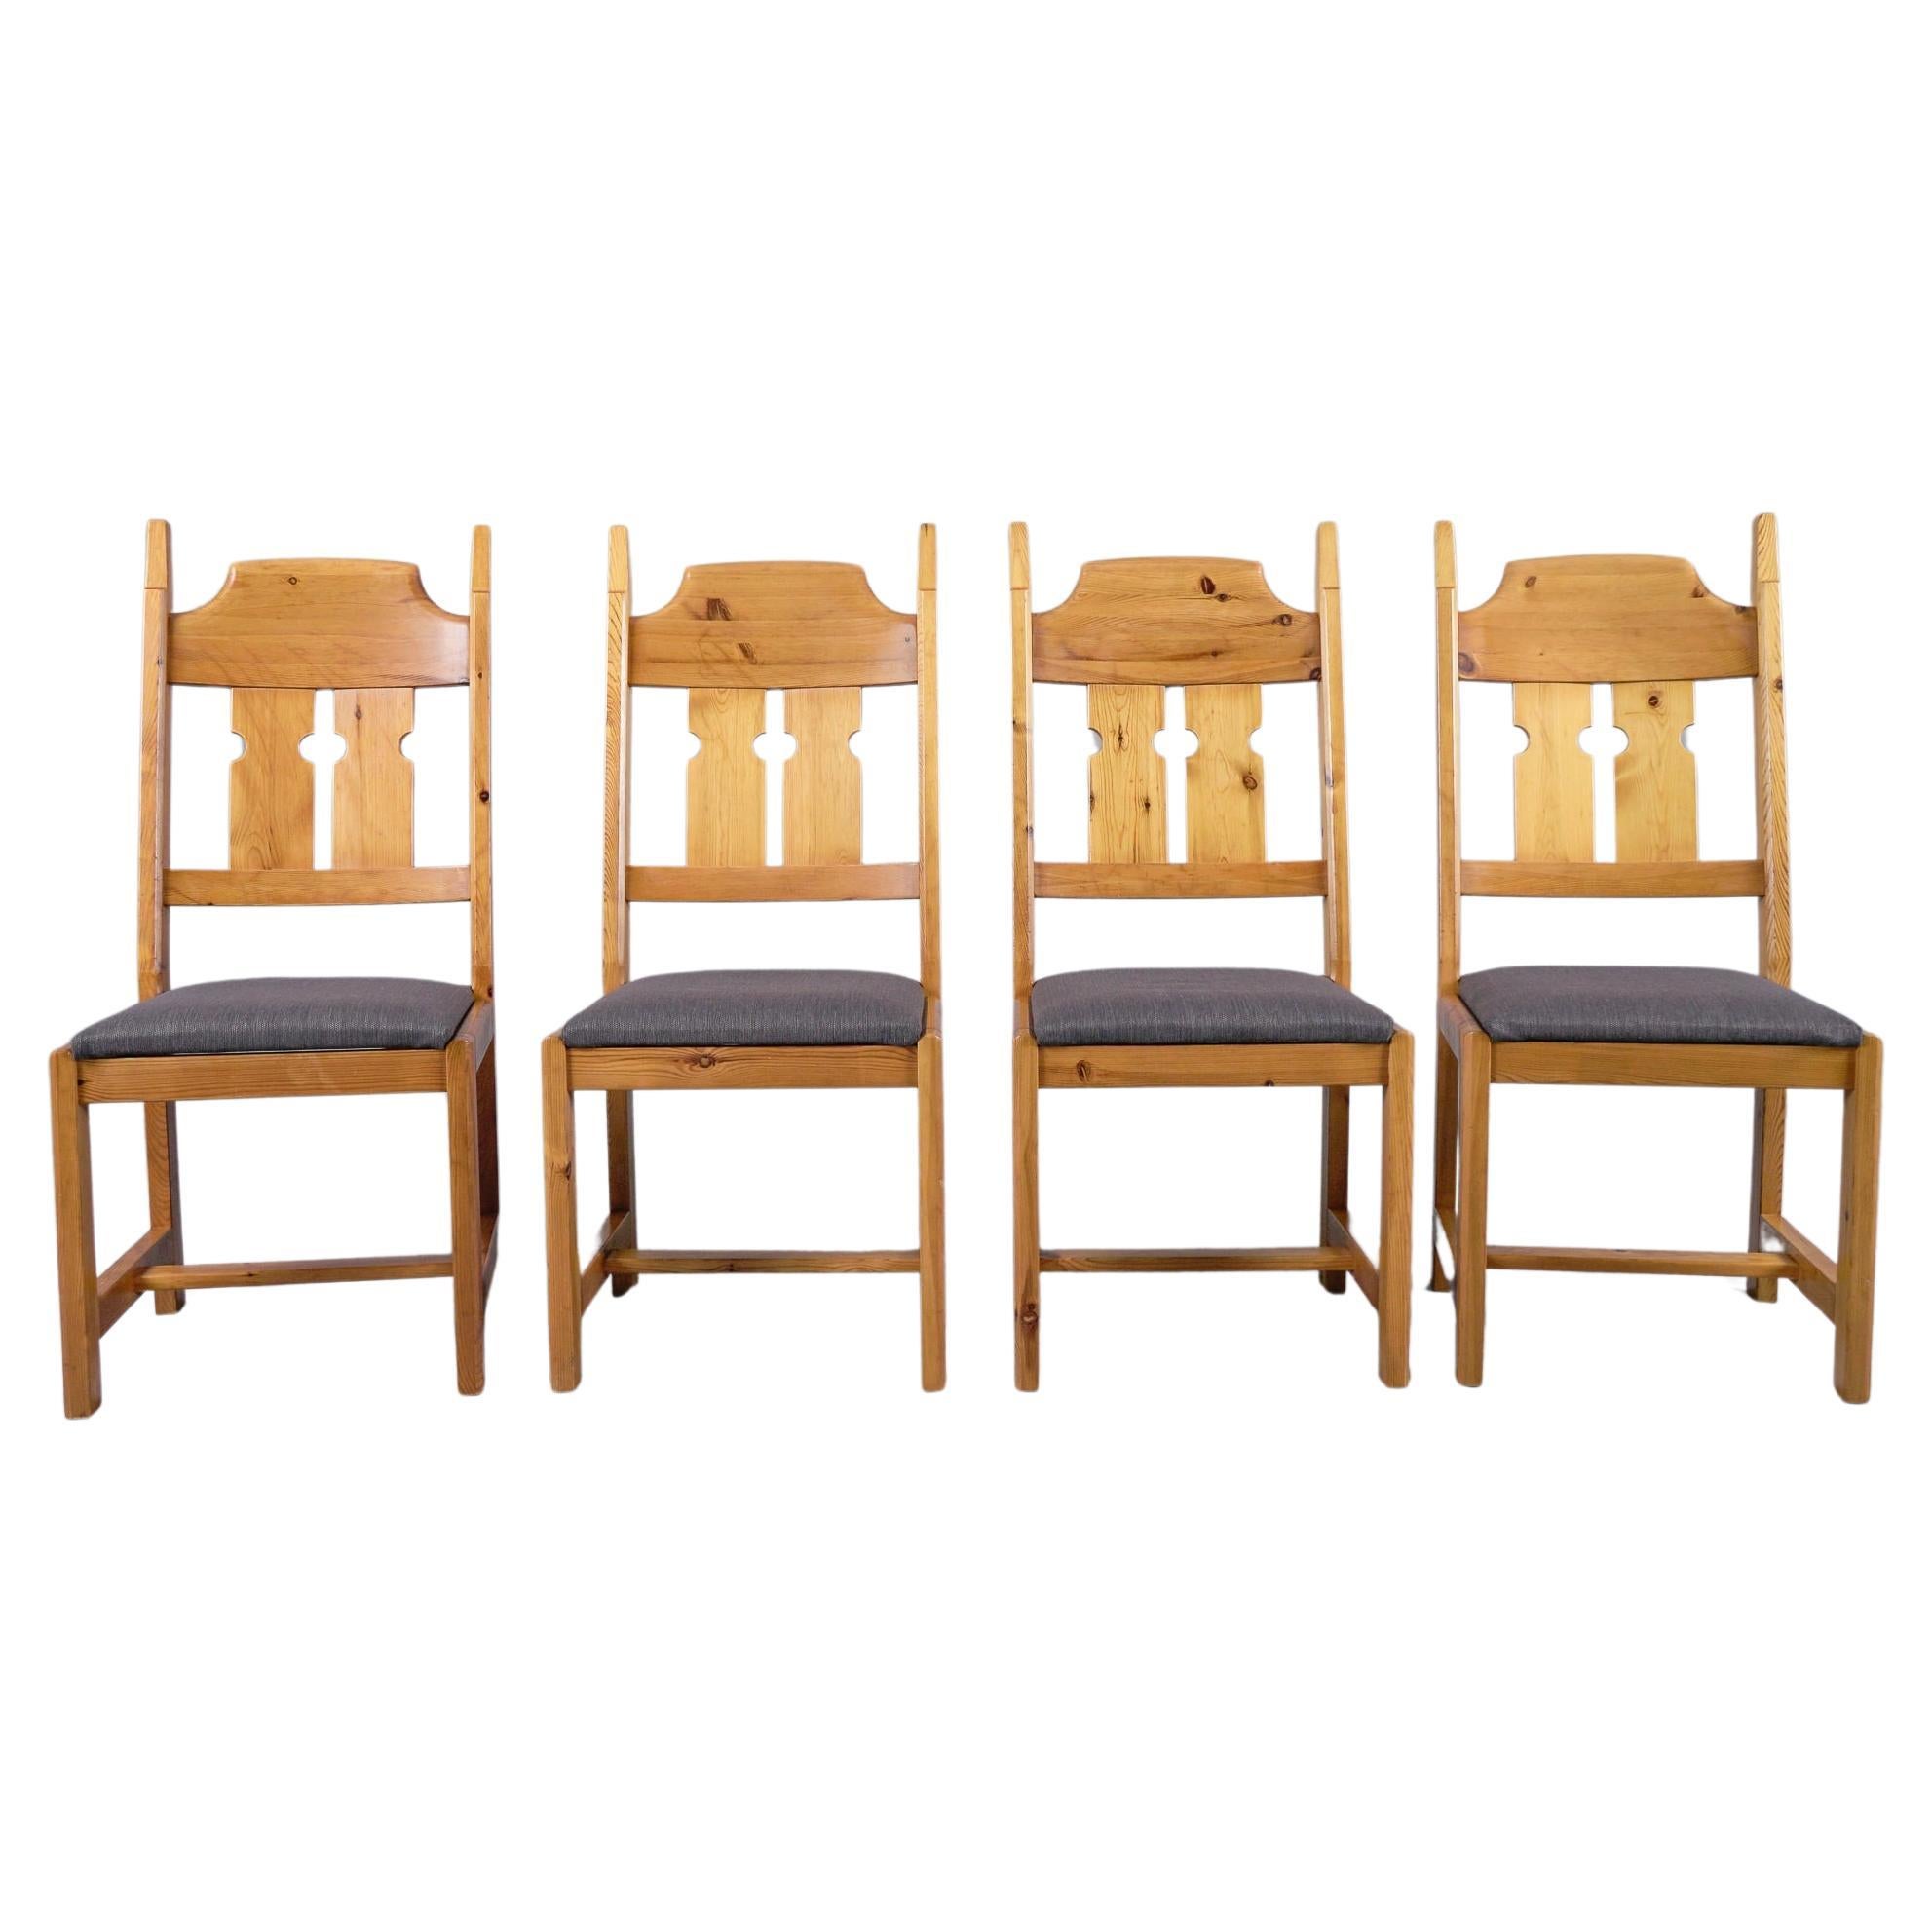  Set of 4 Swedish Pine Chairs by Gilbert Marklund for Furusnickarn AB, 1970s For Sale